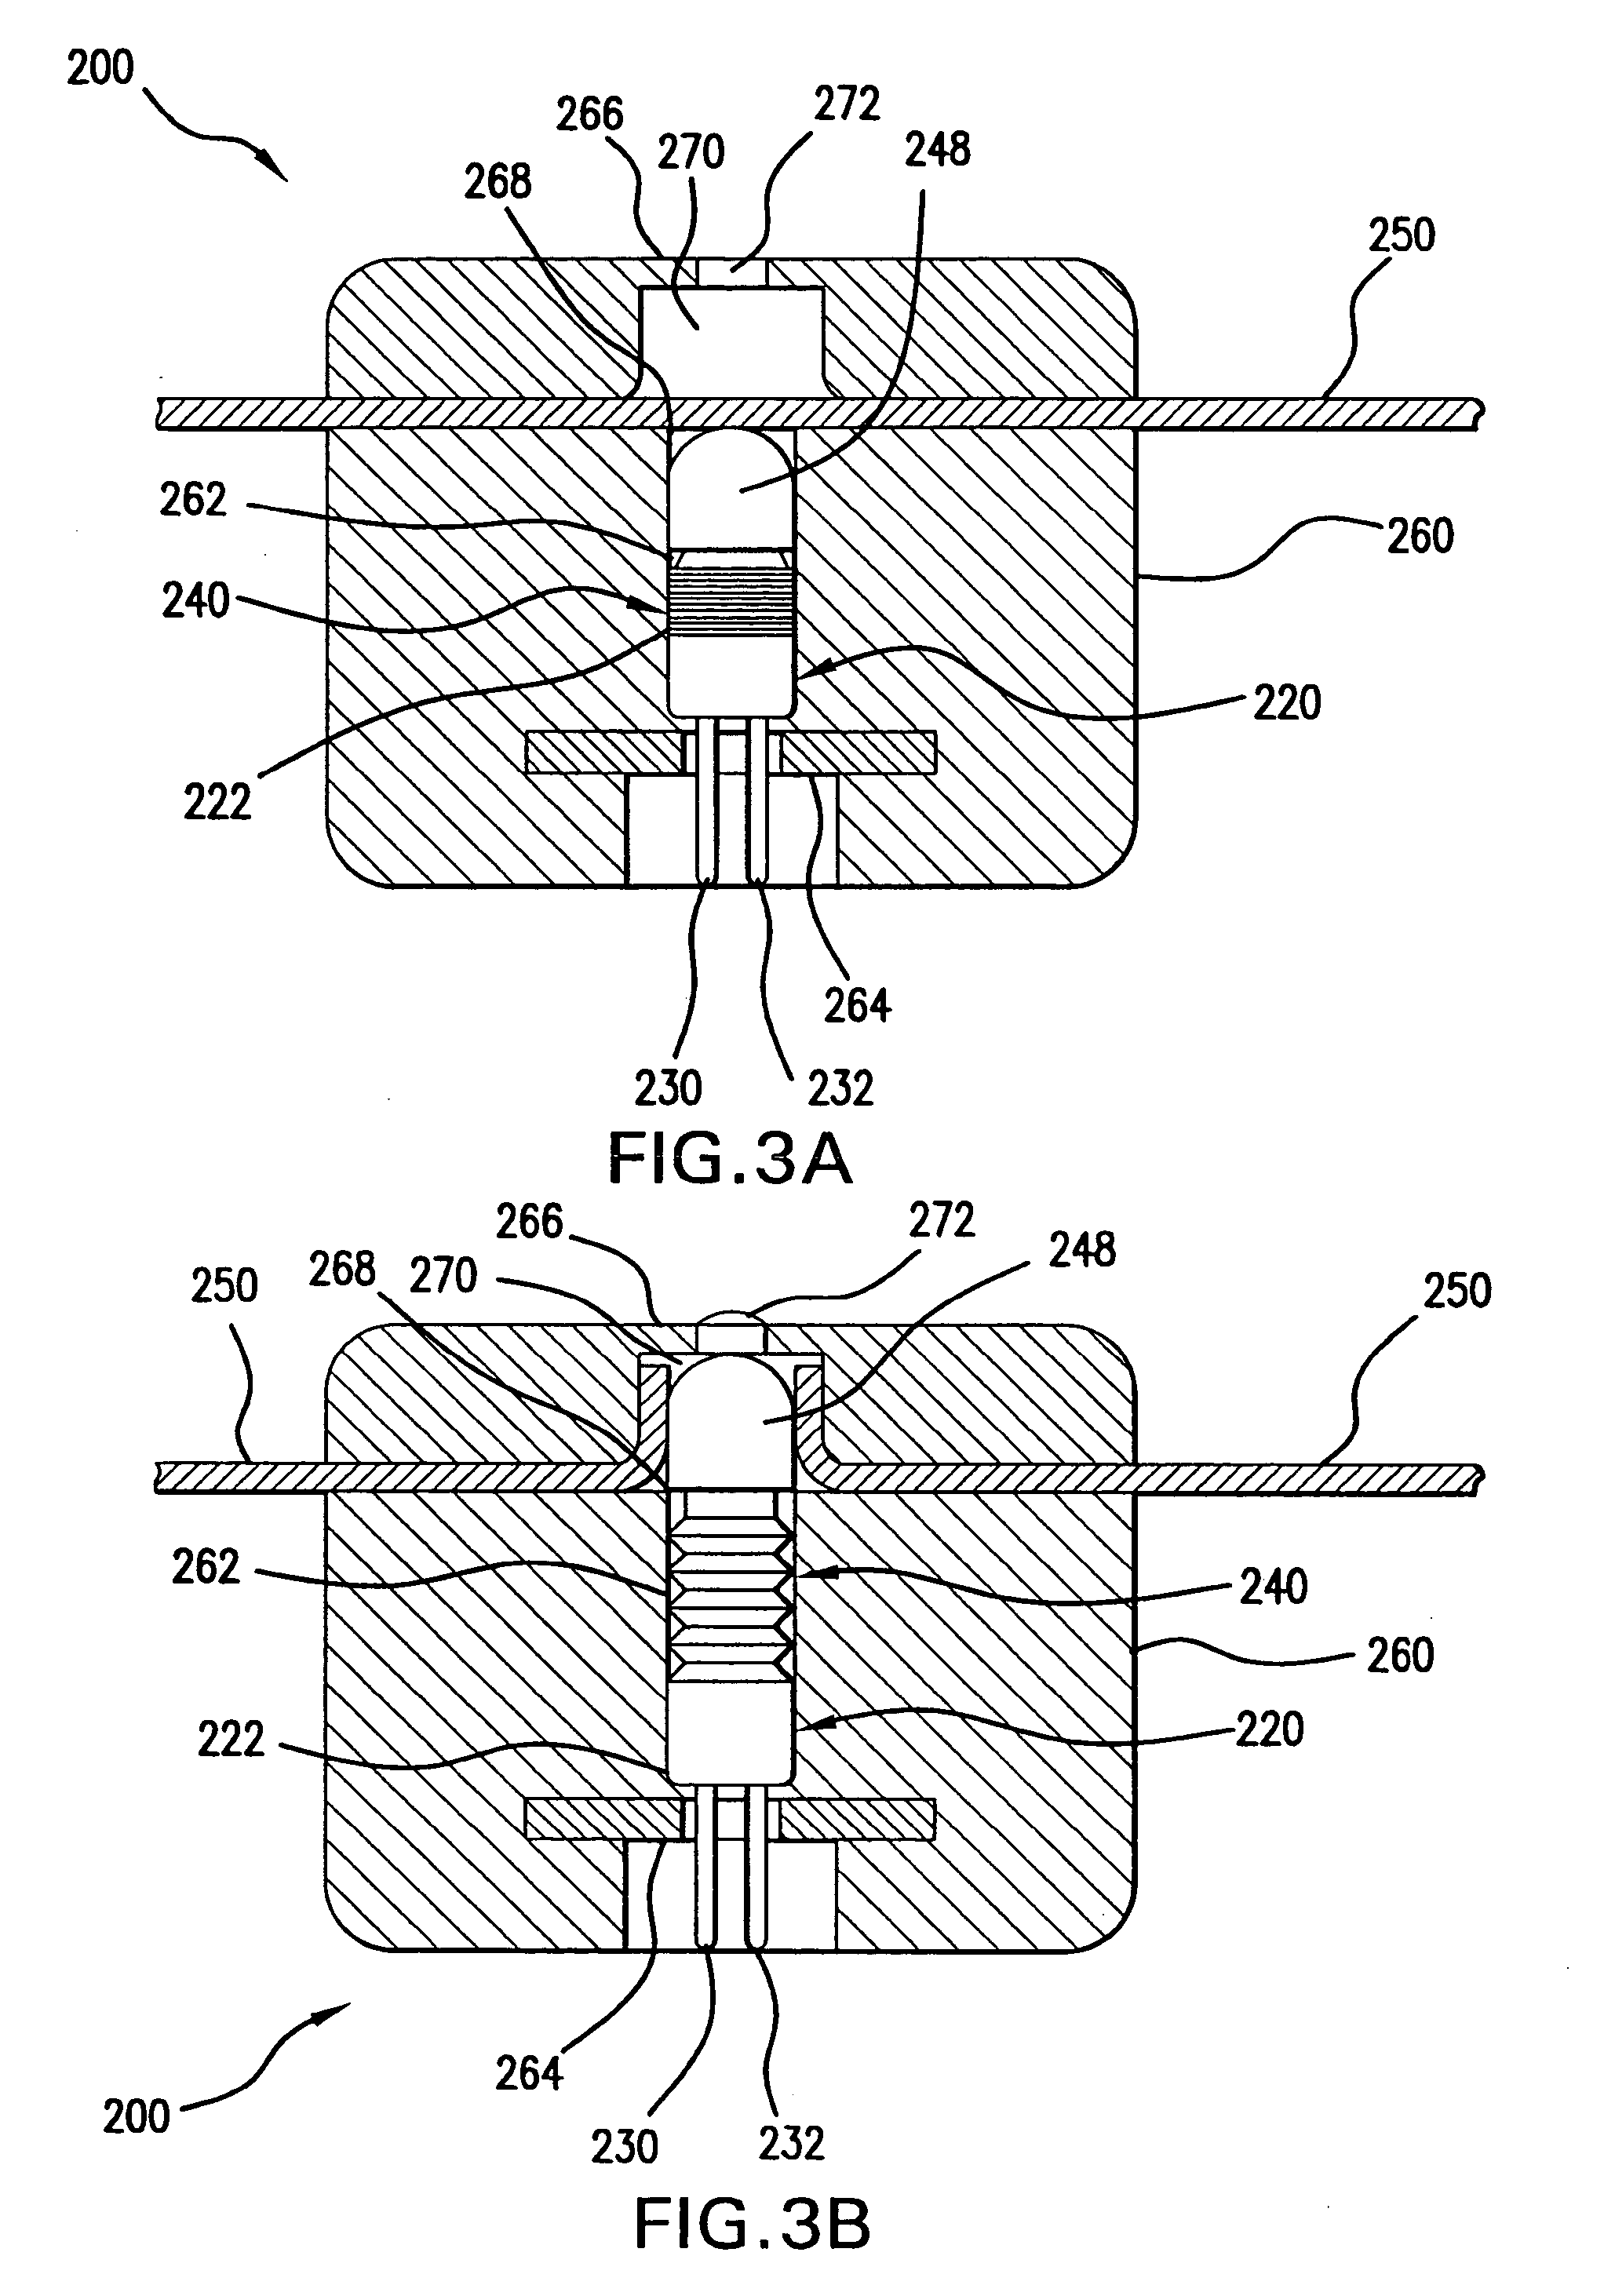 Assemblies including extendable, reactive charge-containing actuator devices